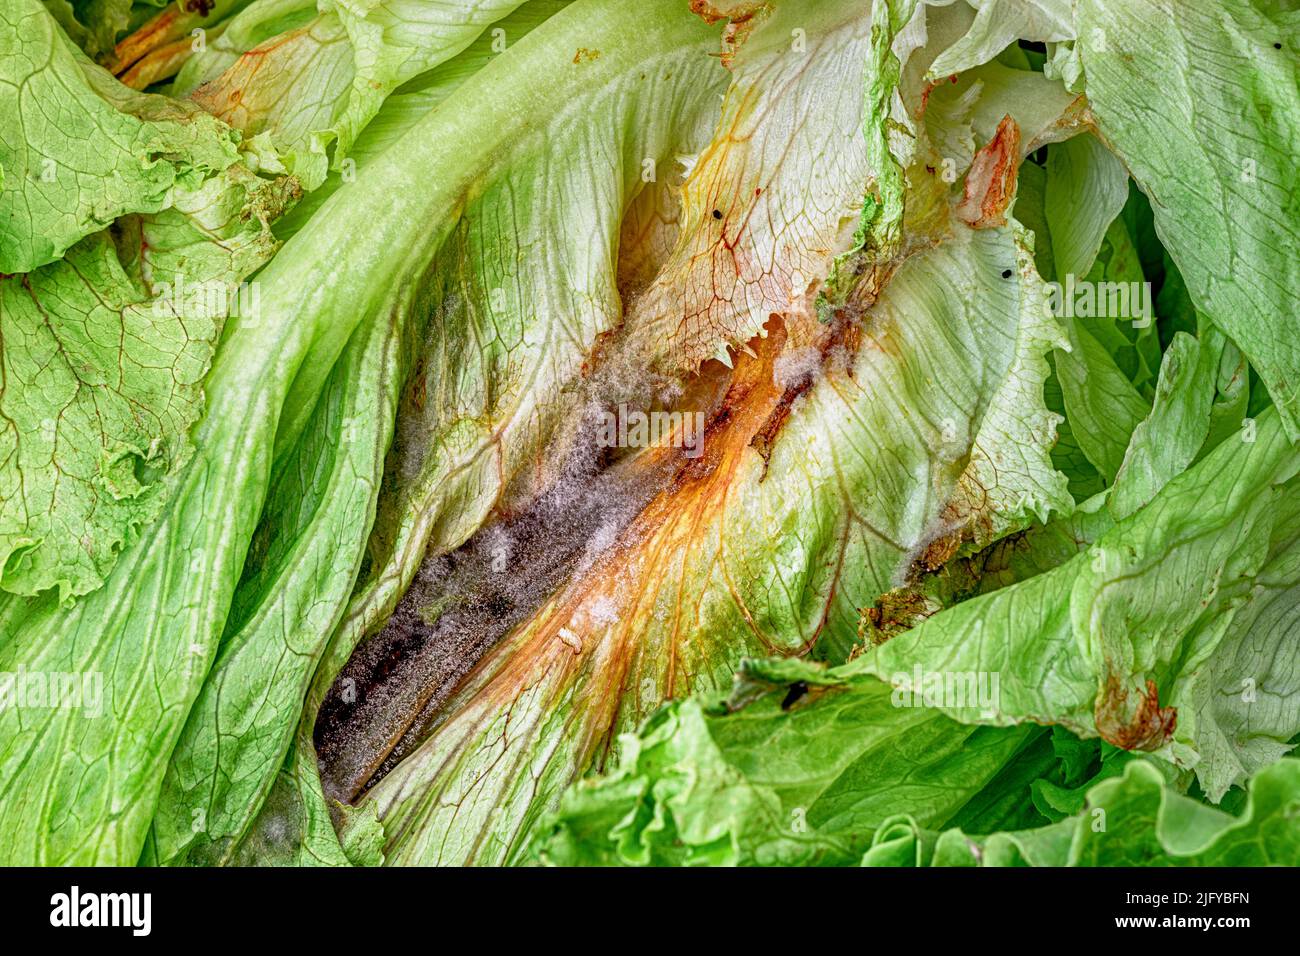 greens cabbage leaf with mold and fungus. A spoiled natural product. Protection of agricultural crops Stock Photo